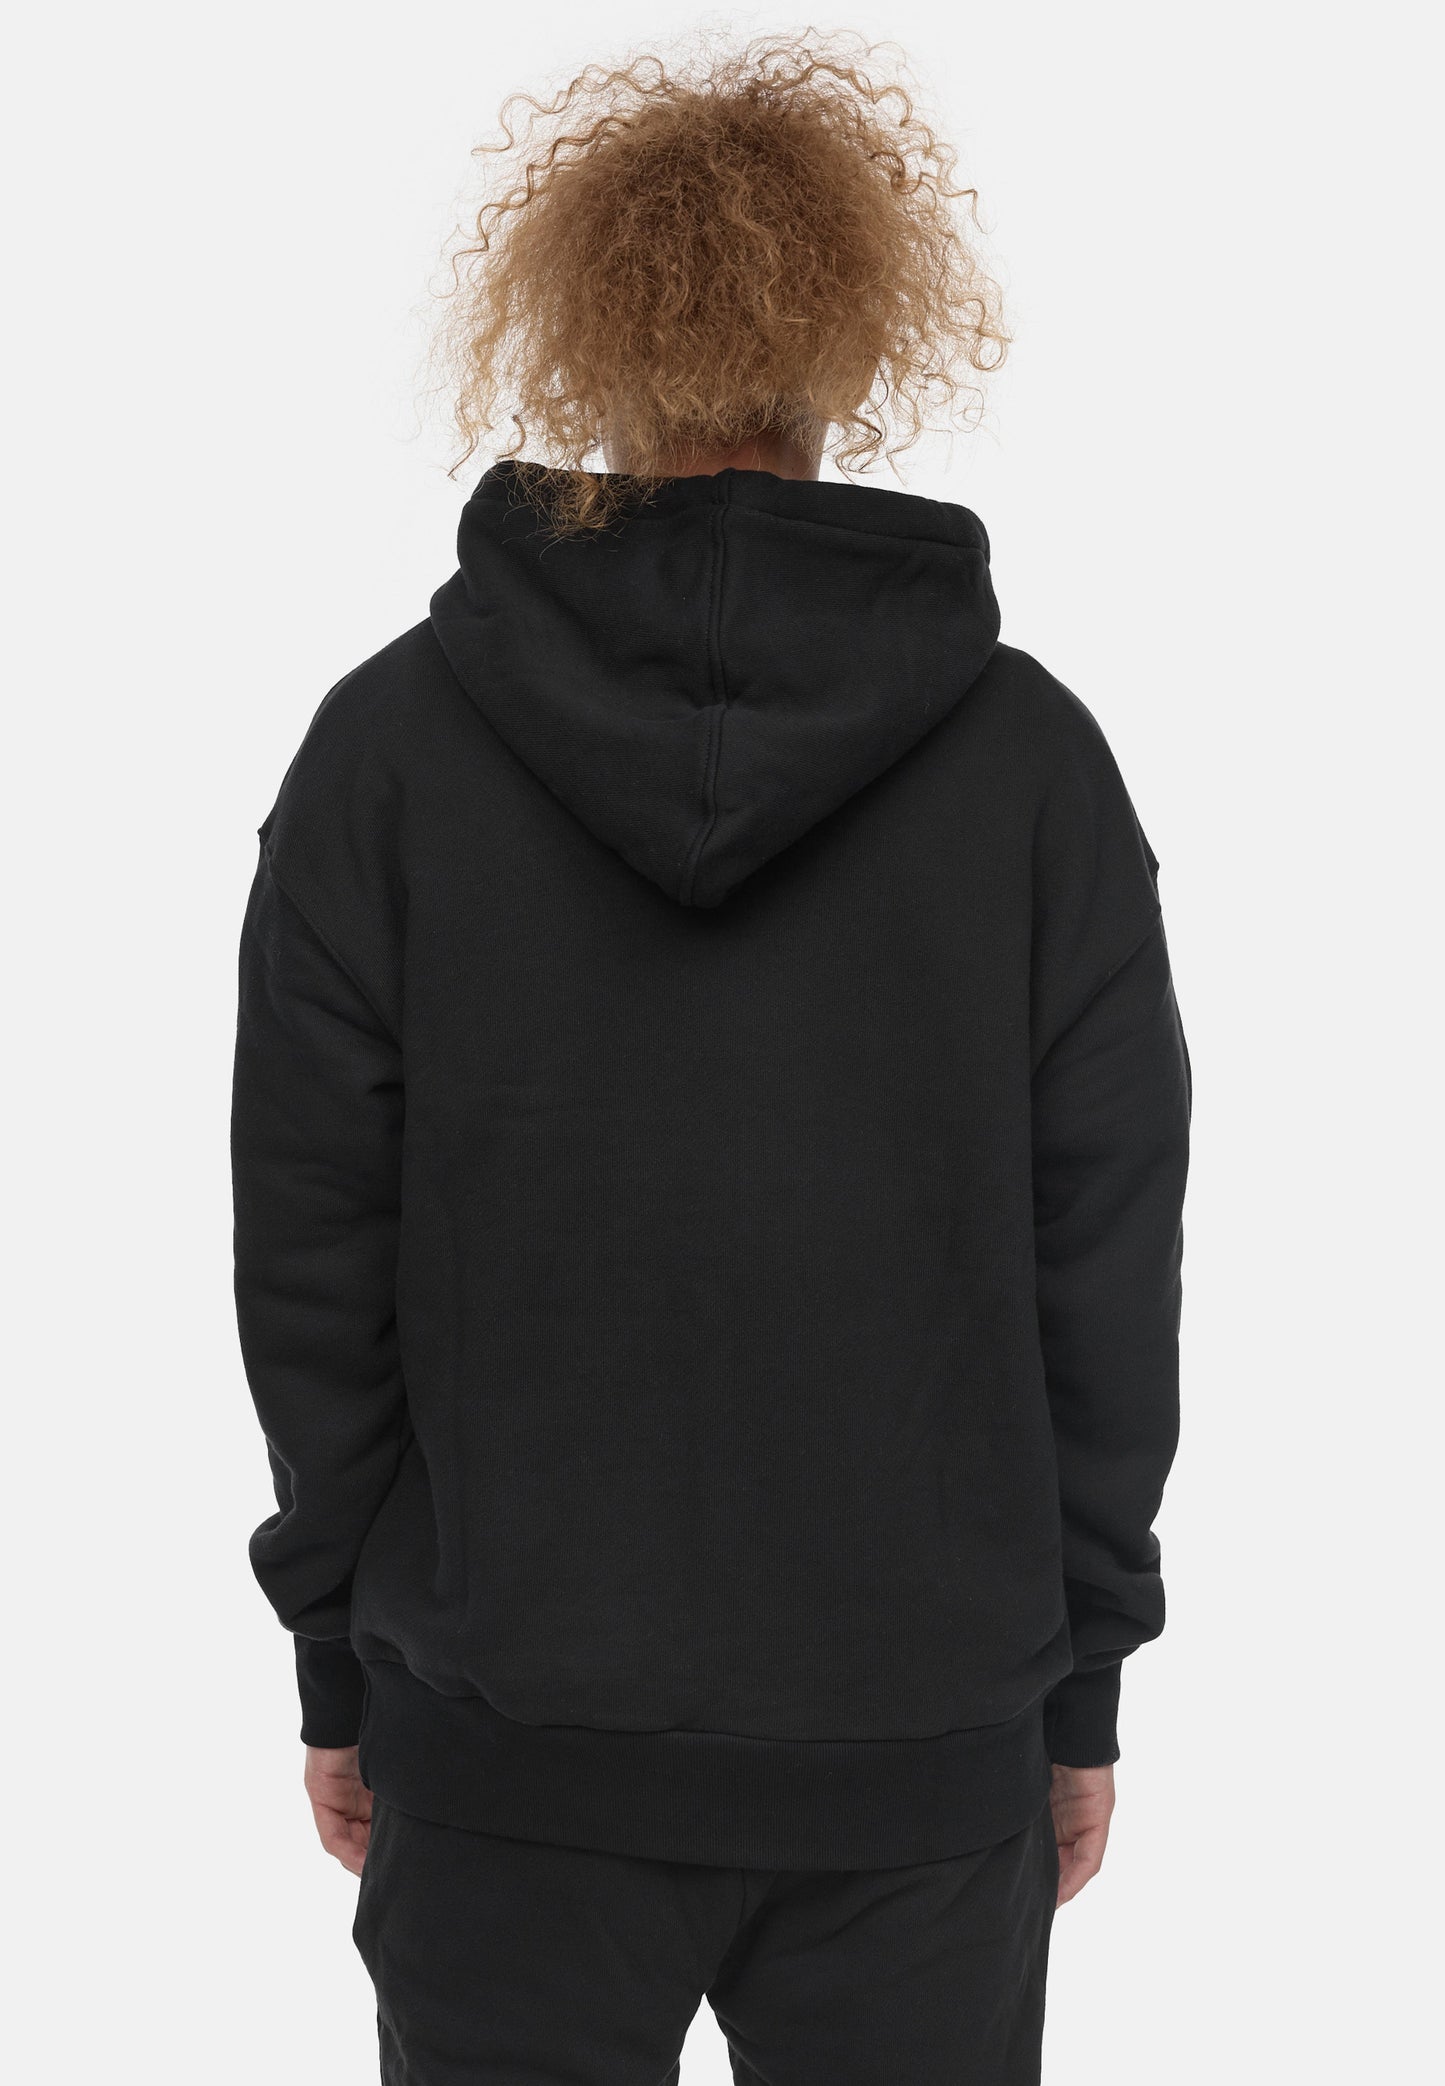 LUXAGER 1st EDITION HOODIE